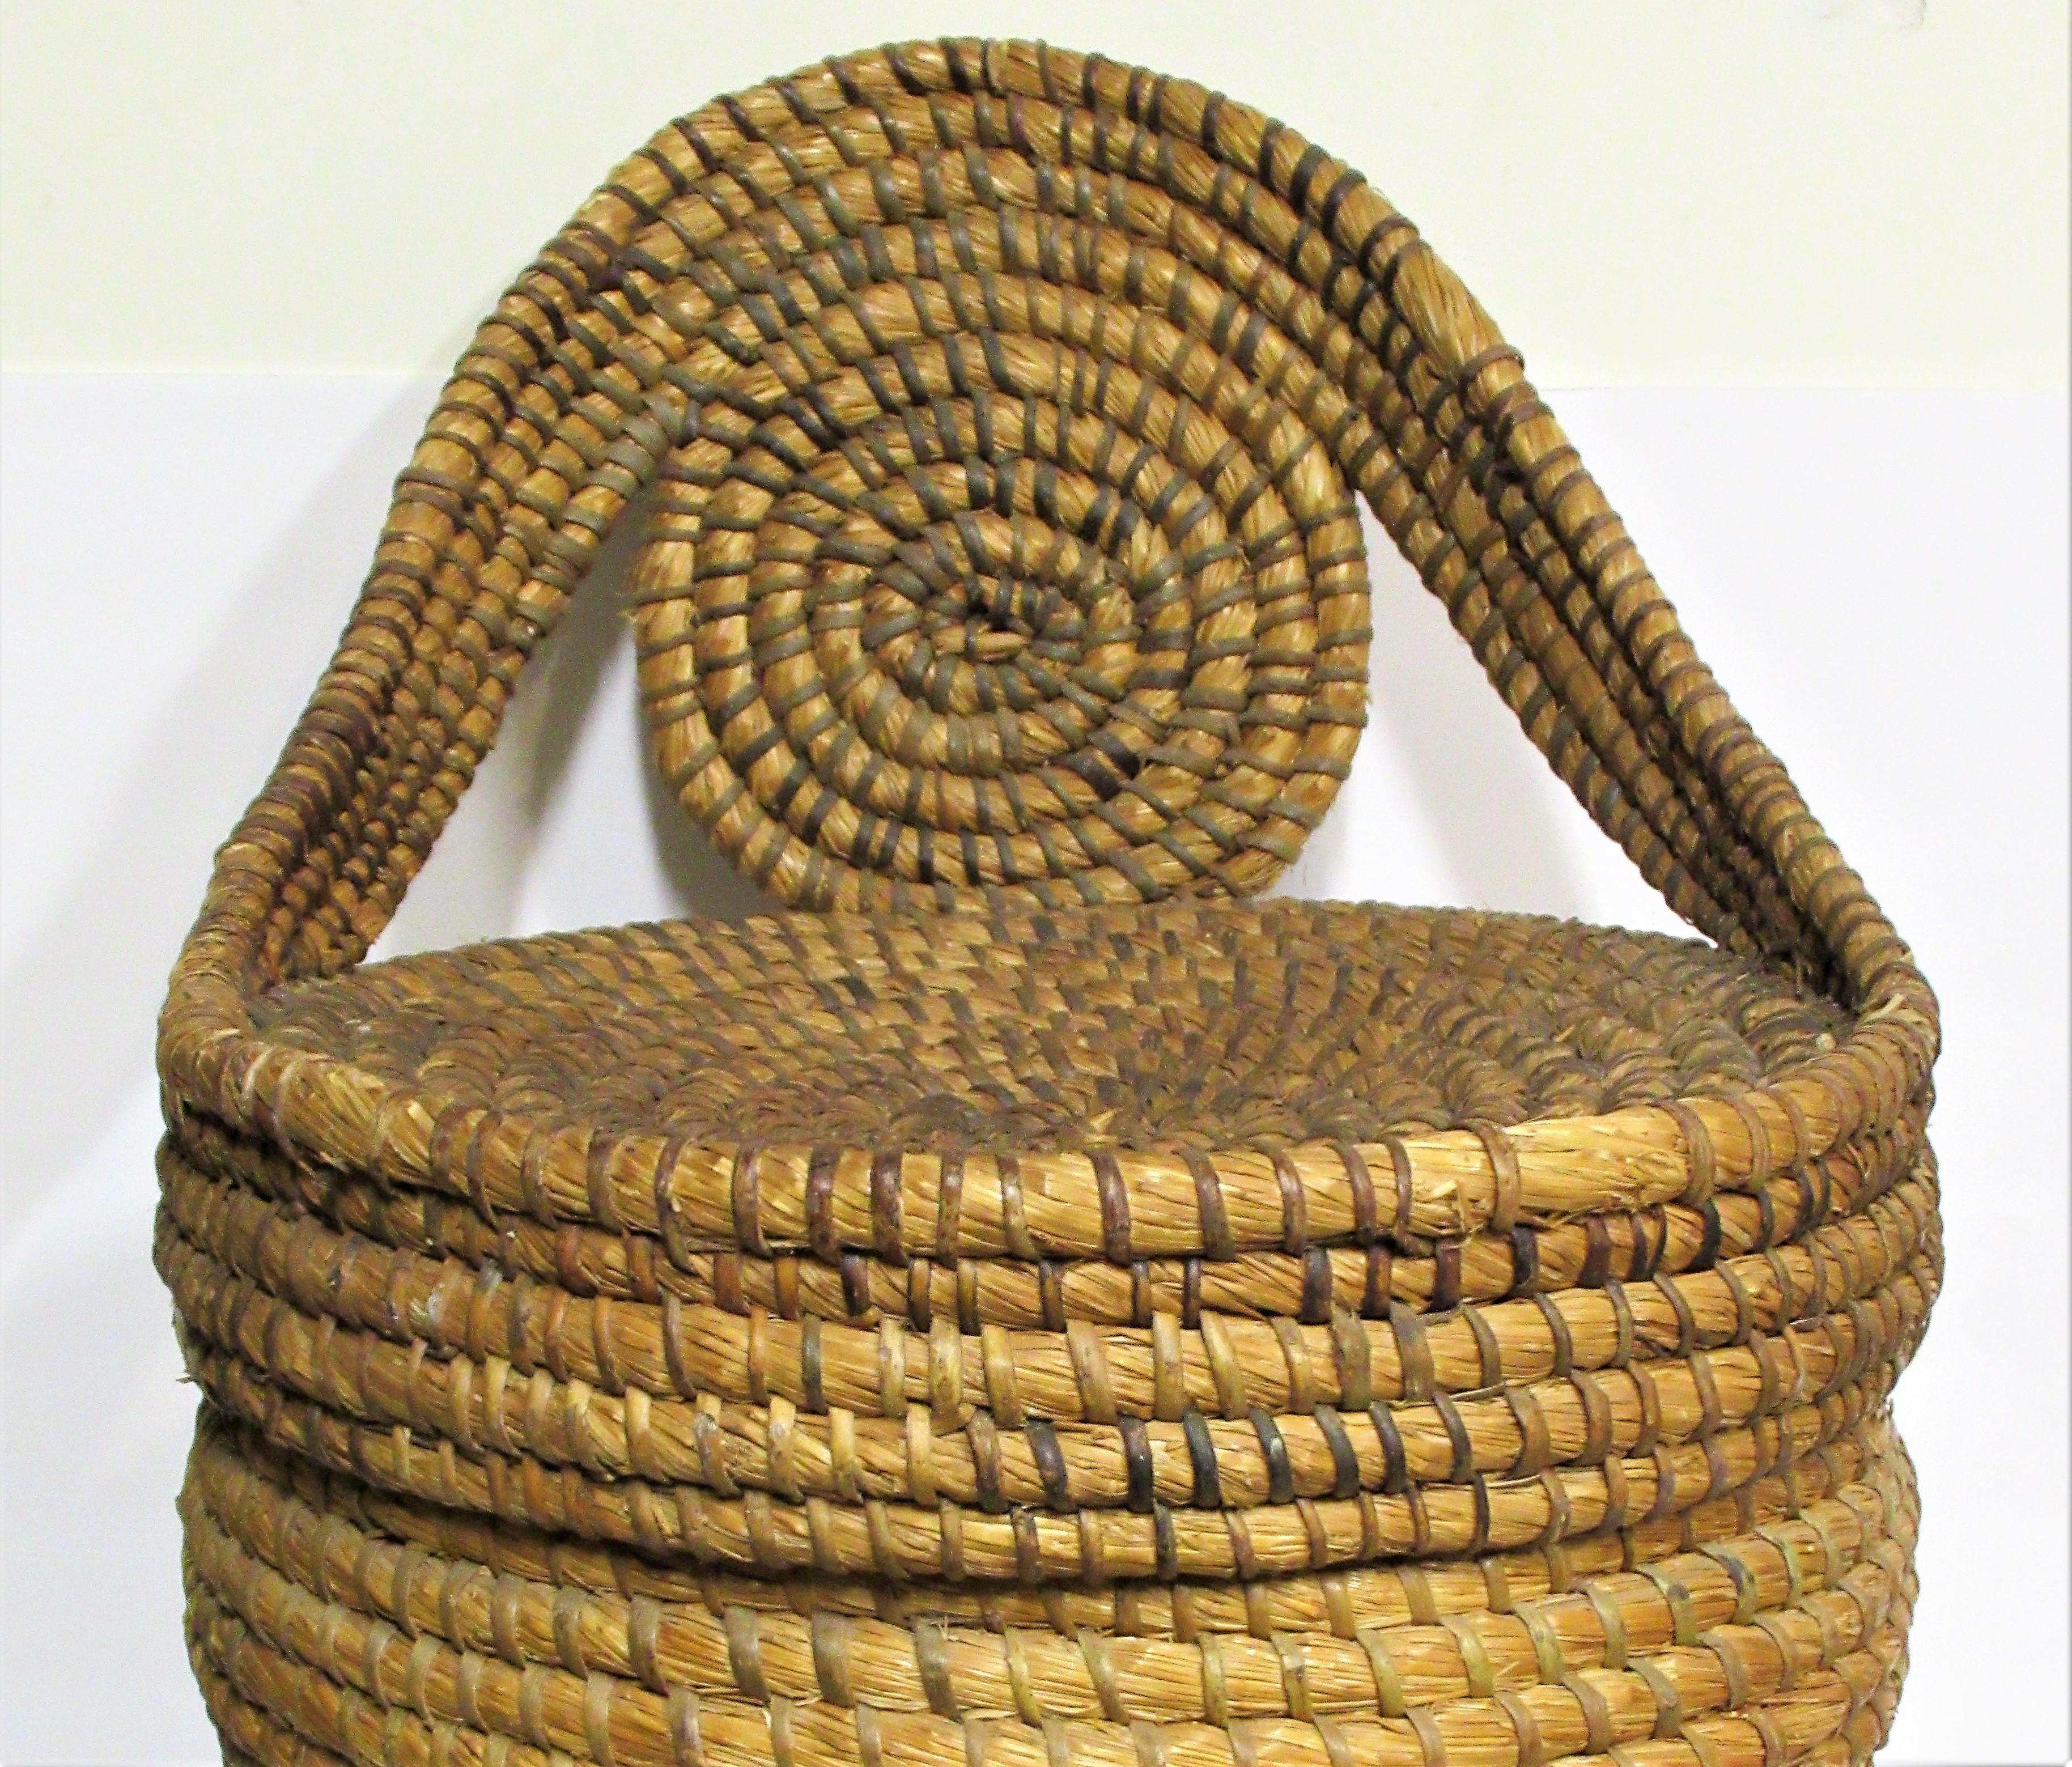 Large antique American Folk Art woven rye straw lidded basket with a very unusual - possibly rare form. Pennsylvania, late 19th-early 20th century. Measures 24 inches high x 16 inches wide across front x 18 inches across at top lid across from back